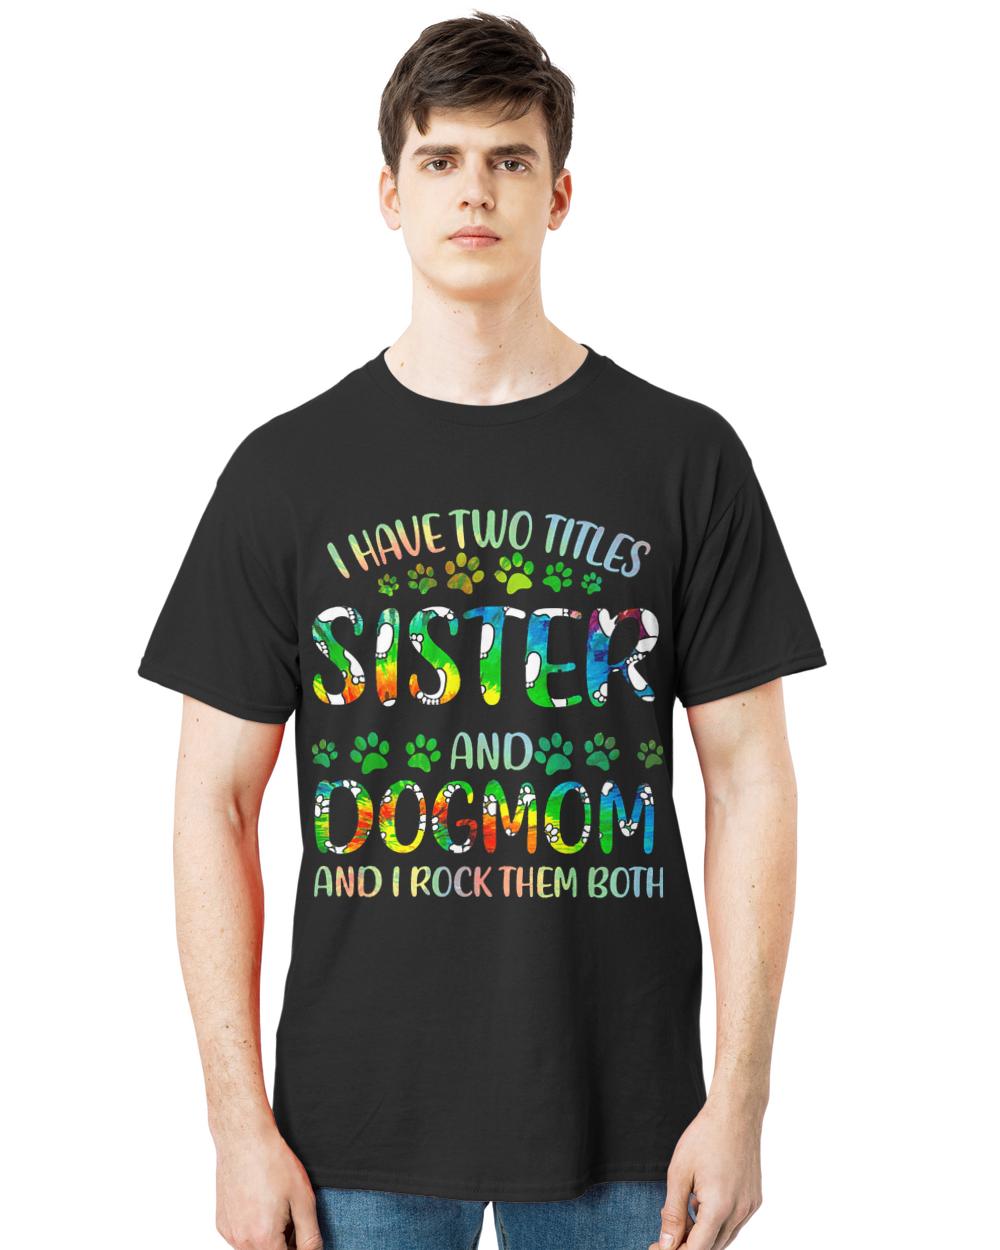 Sister And Dog Mom T- Shirt I Have Two Titles Sister And Dog Mom T- Shirt